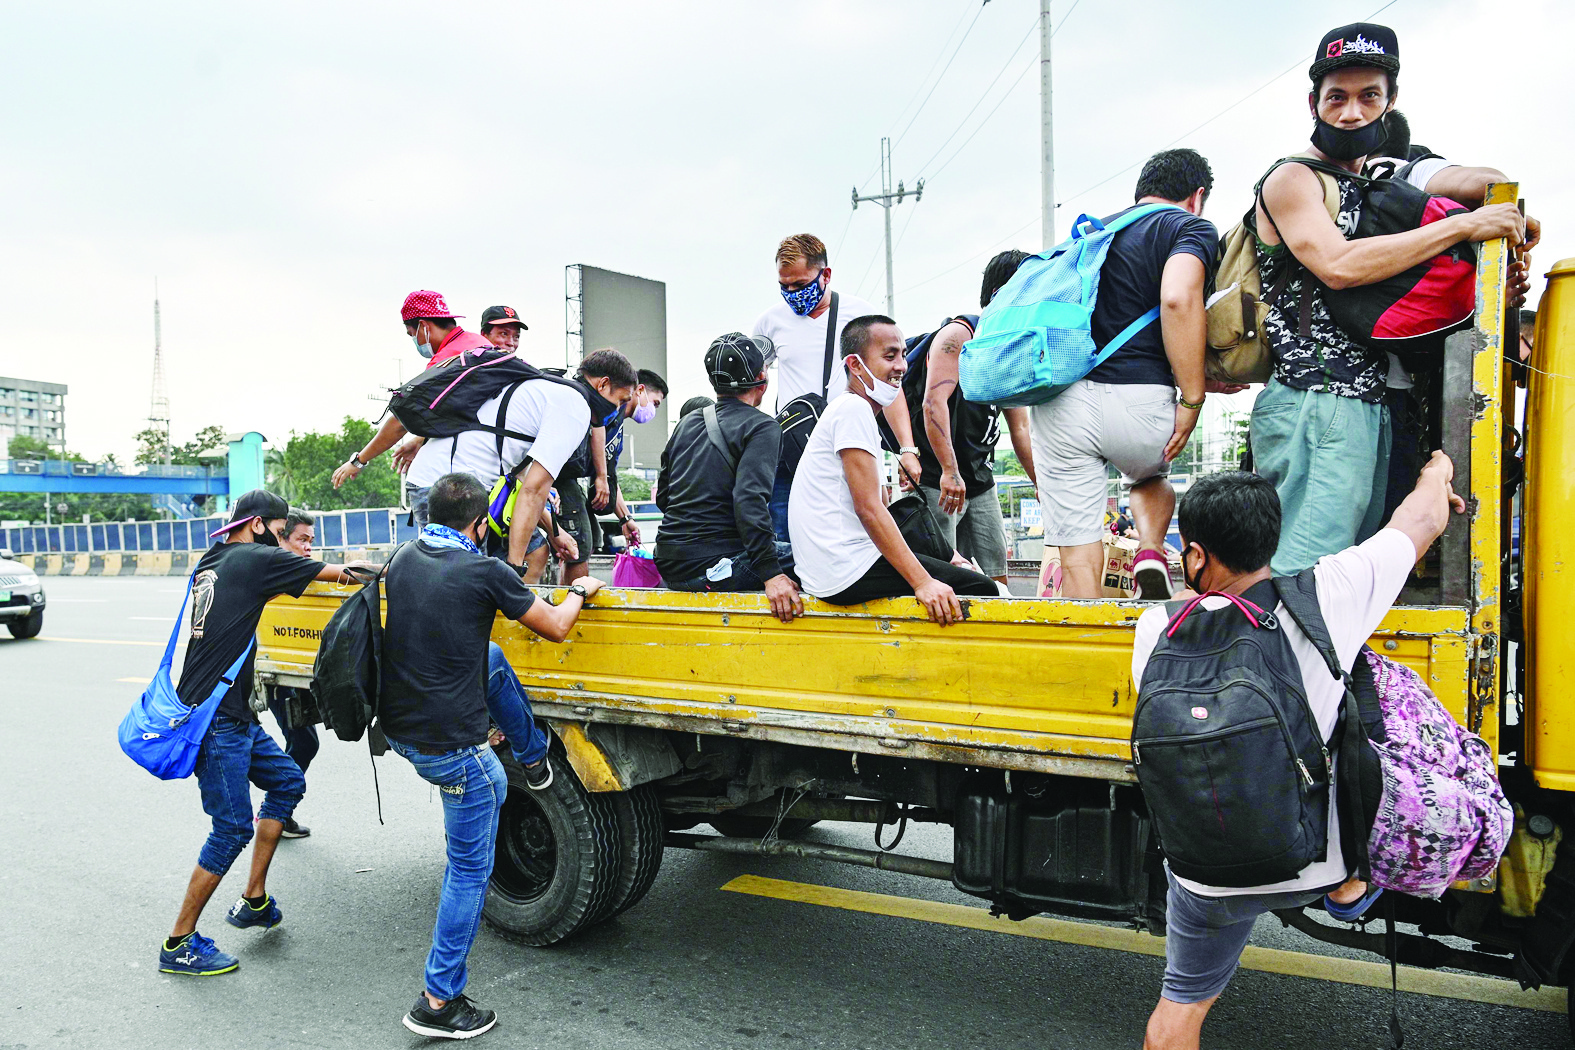 Residents get into a truck for a free ride home in Manila on March 17, 2020, as the government imposed measures to curb the spread of the COVID-19 coronavirus, including suspending all public transport on the main Luzon island. - Philippine President Rodrigo Duterte ordered about half the country's population to stay home for the next month in a drastic bid on March 16 to curb the rising number of new coronavirus cases. (Photo by Ted ALJIBE / AFP)